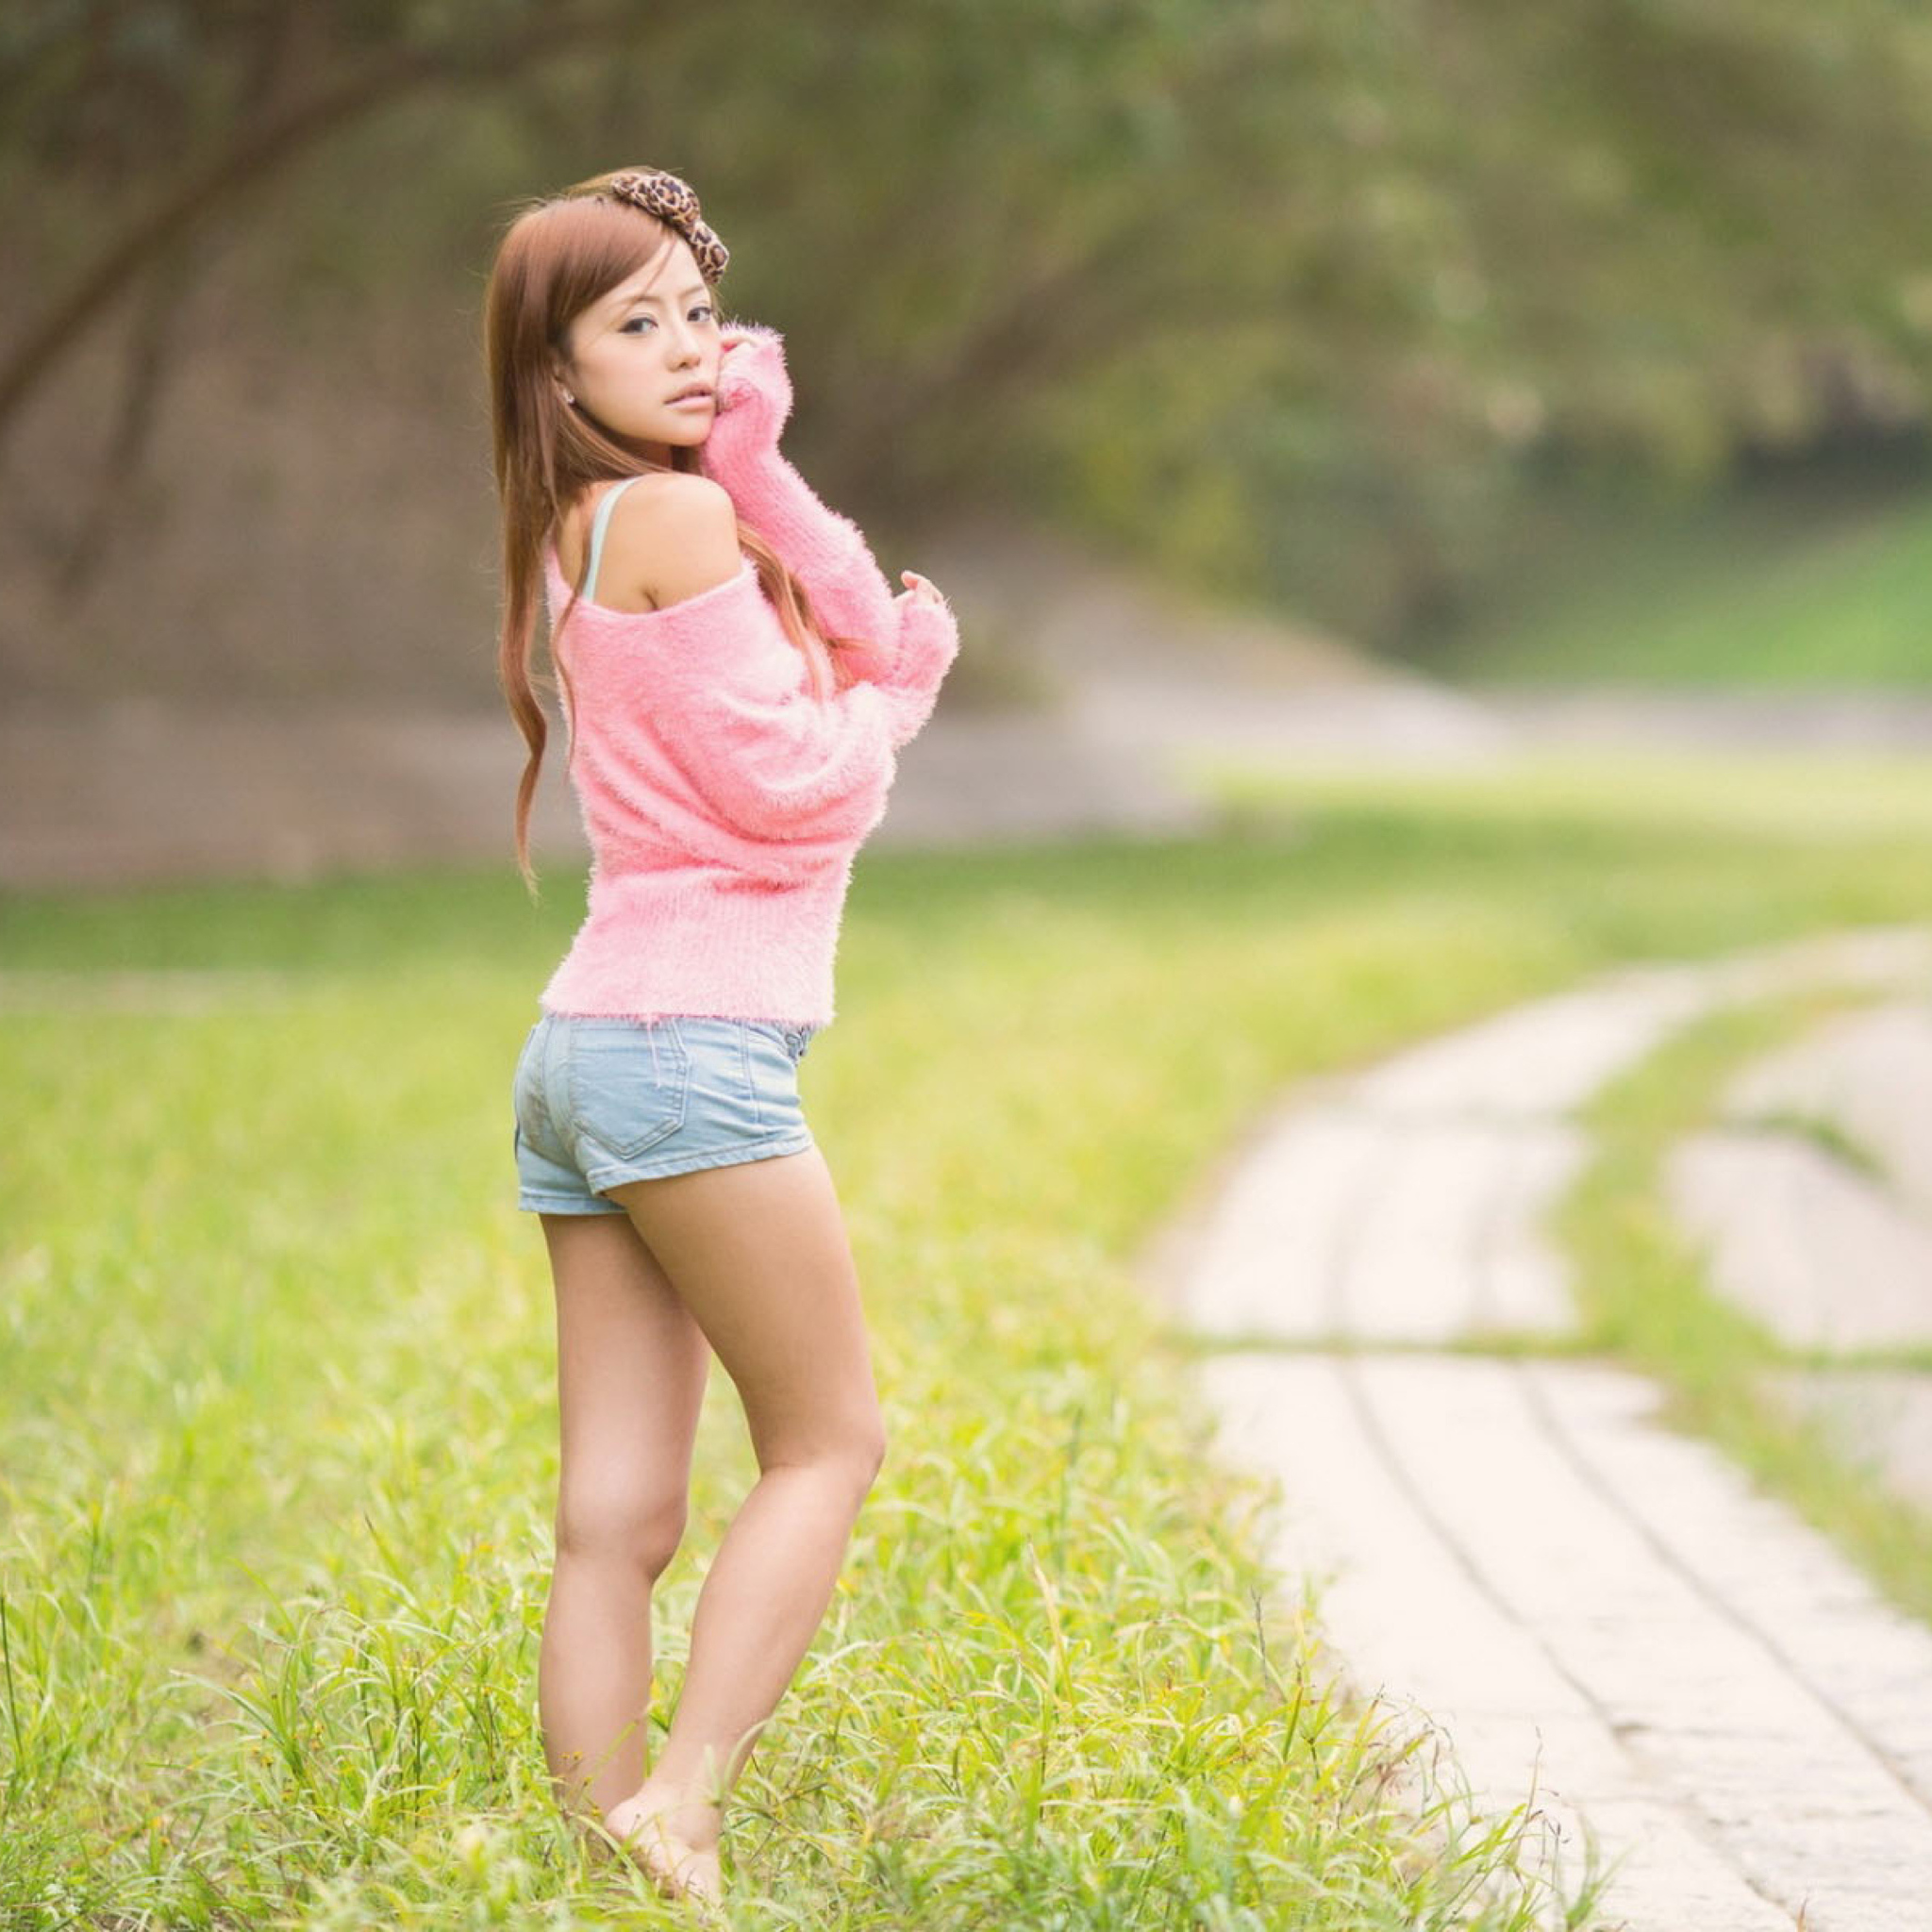 Cute Asian Girl In Pink T-Shirt And Blue Shorts wallpaper 2048x2048